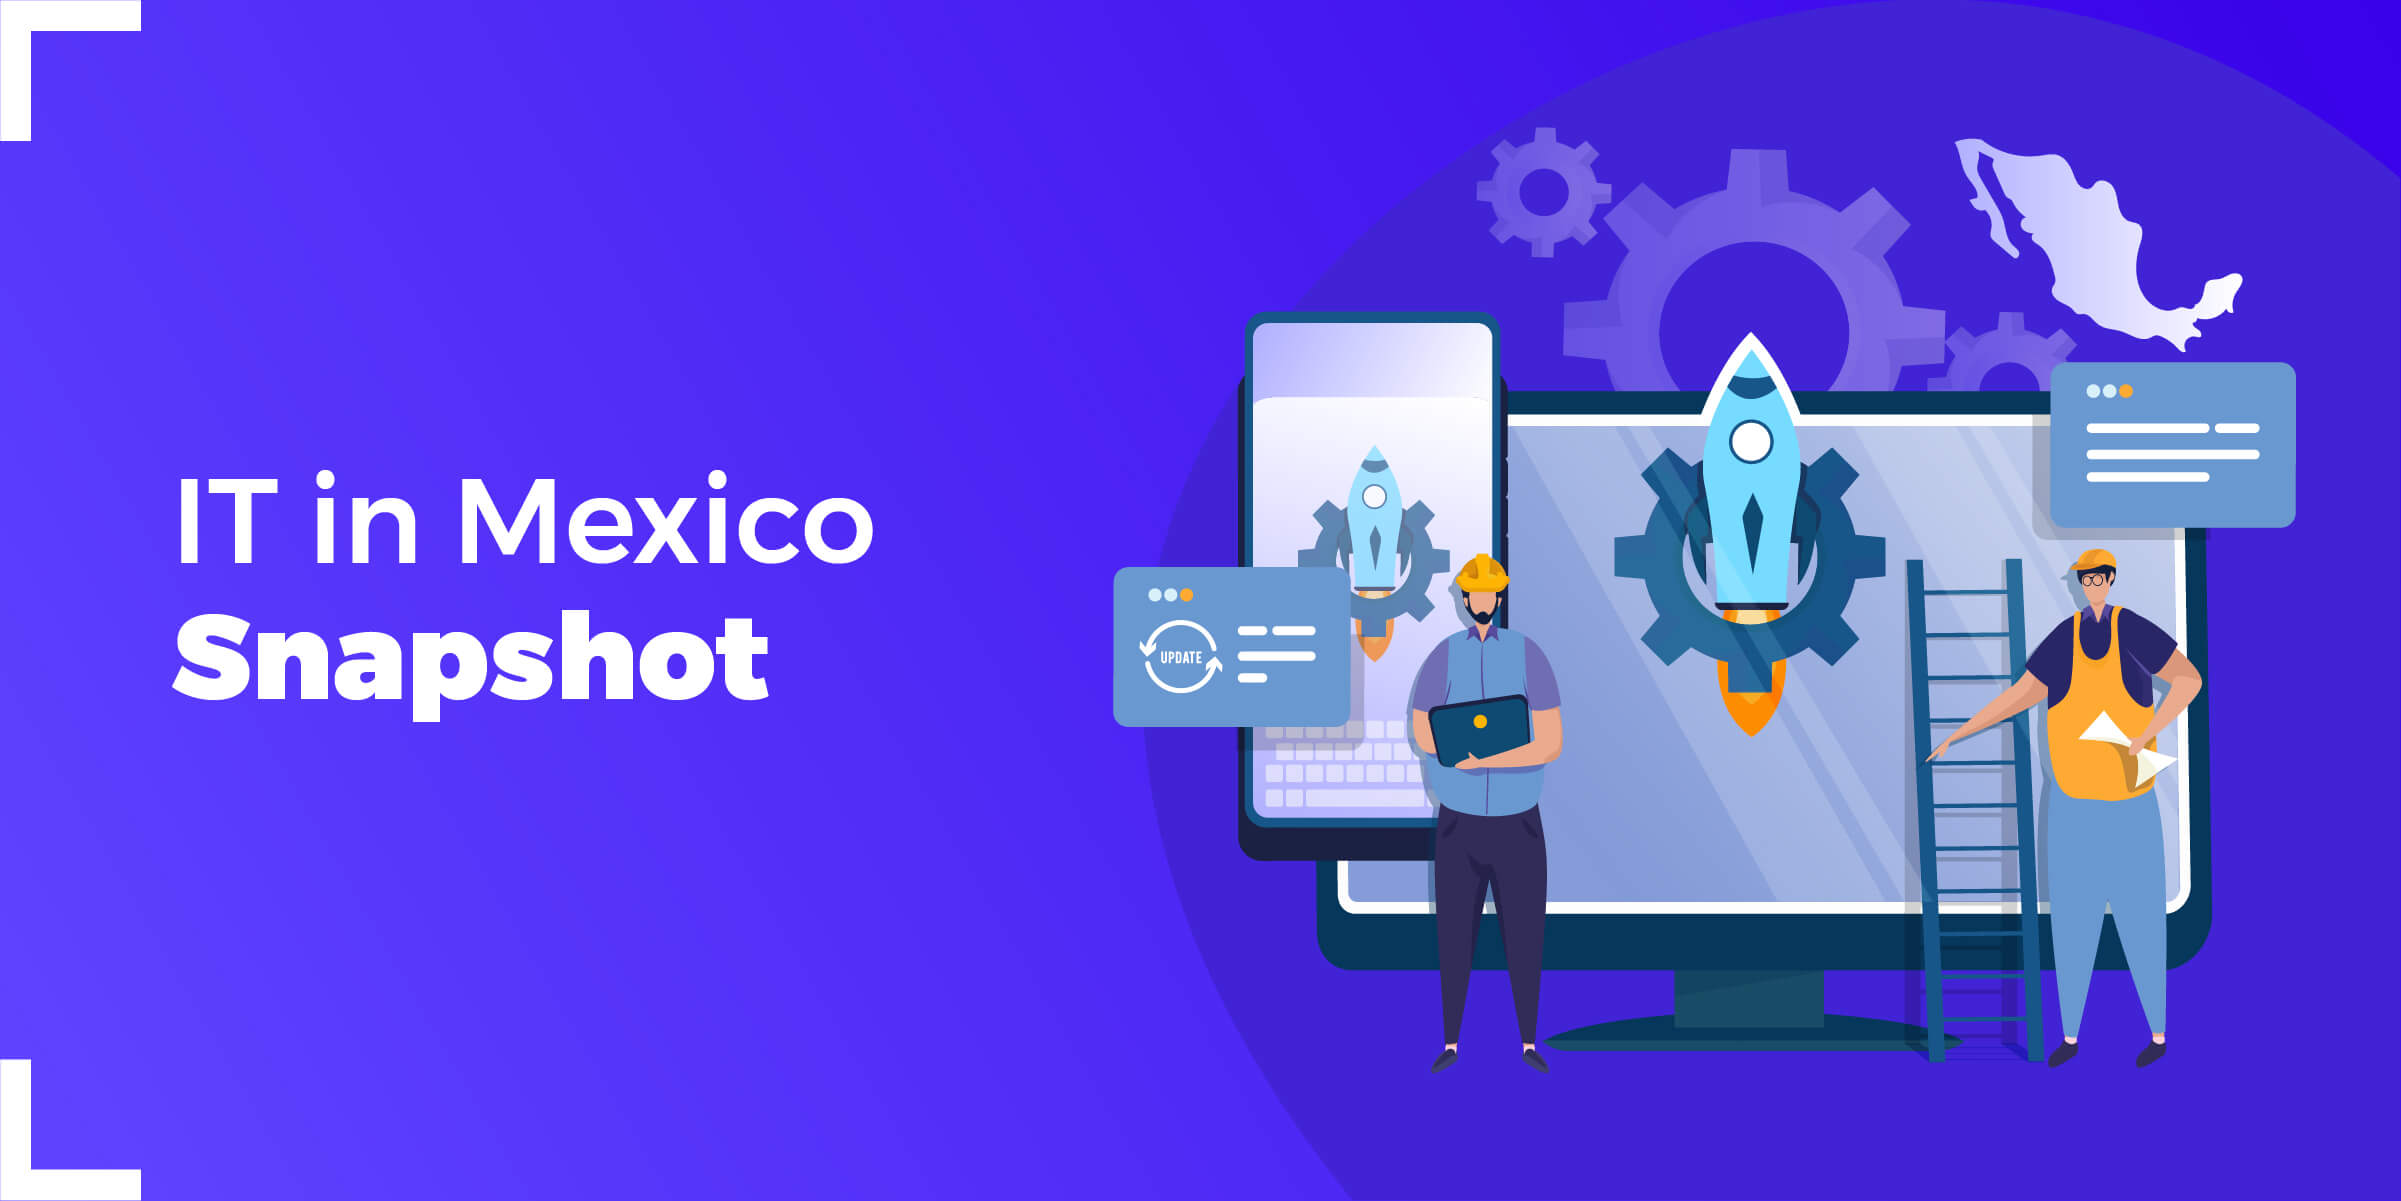 IT in Mexico Snapshot